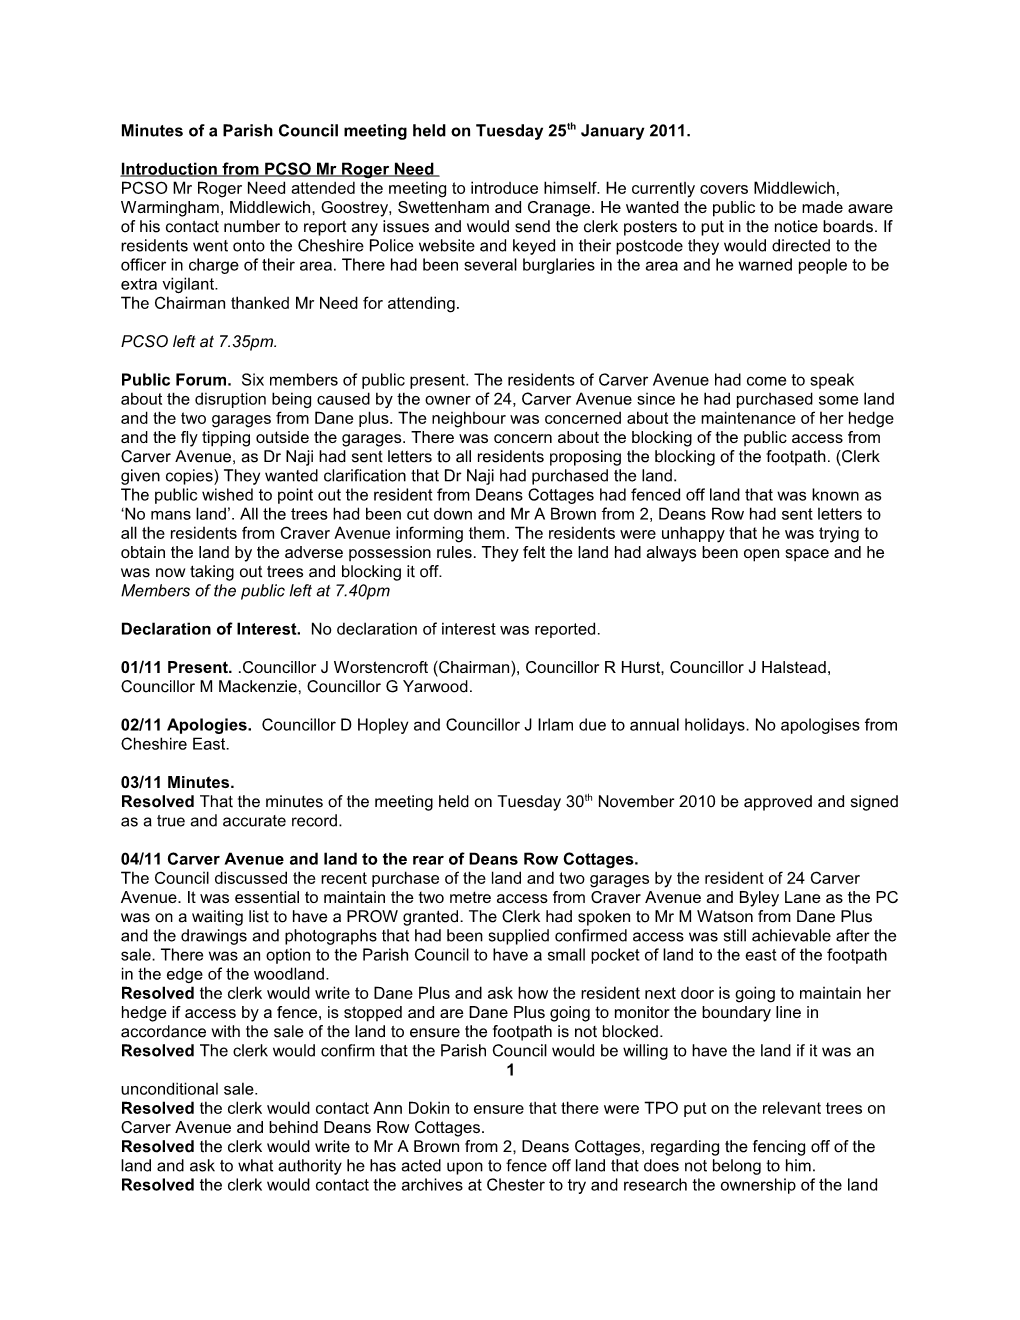 Minutes of a Parish Council Meeting Held on Tuesday 25Th January 2011